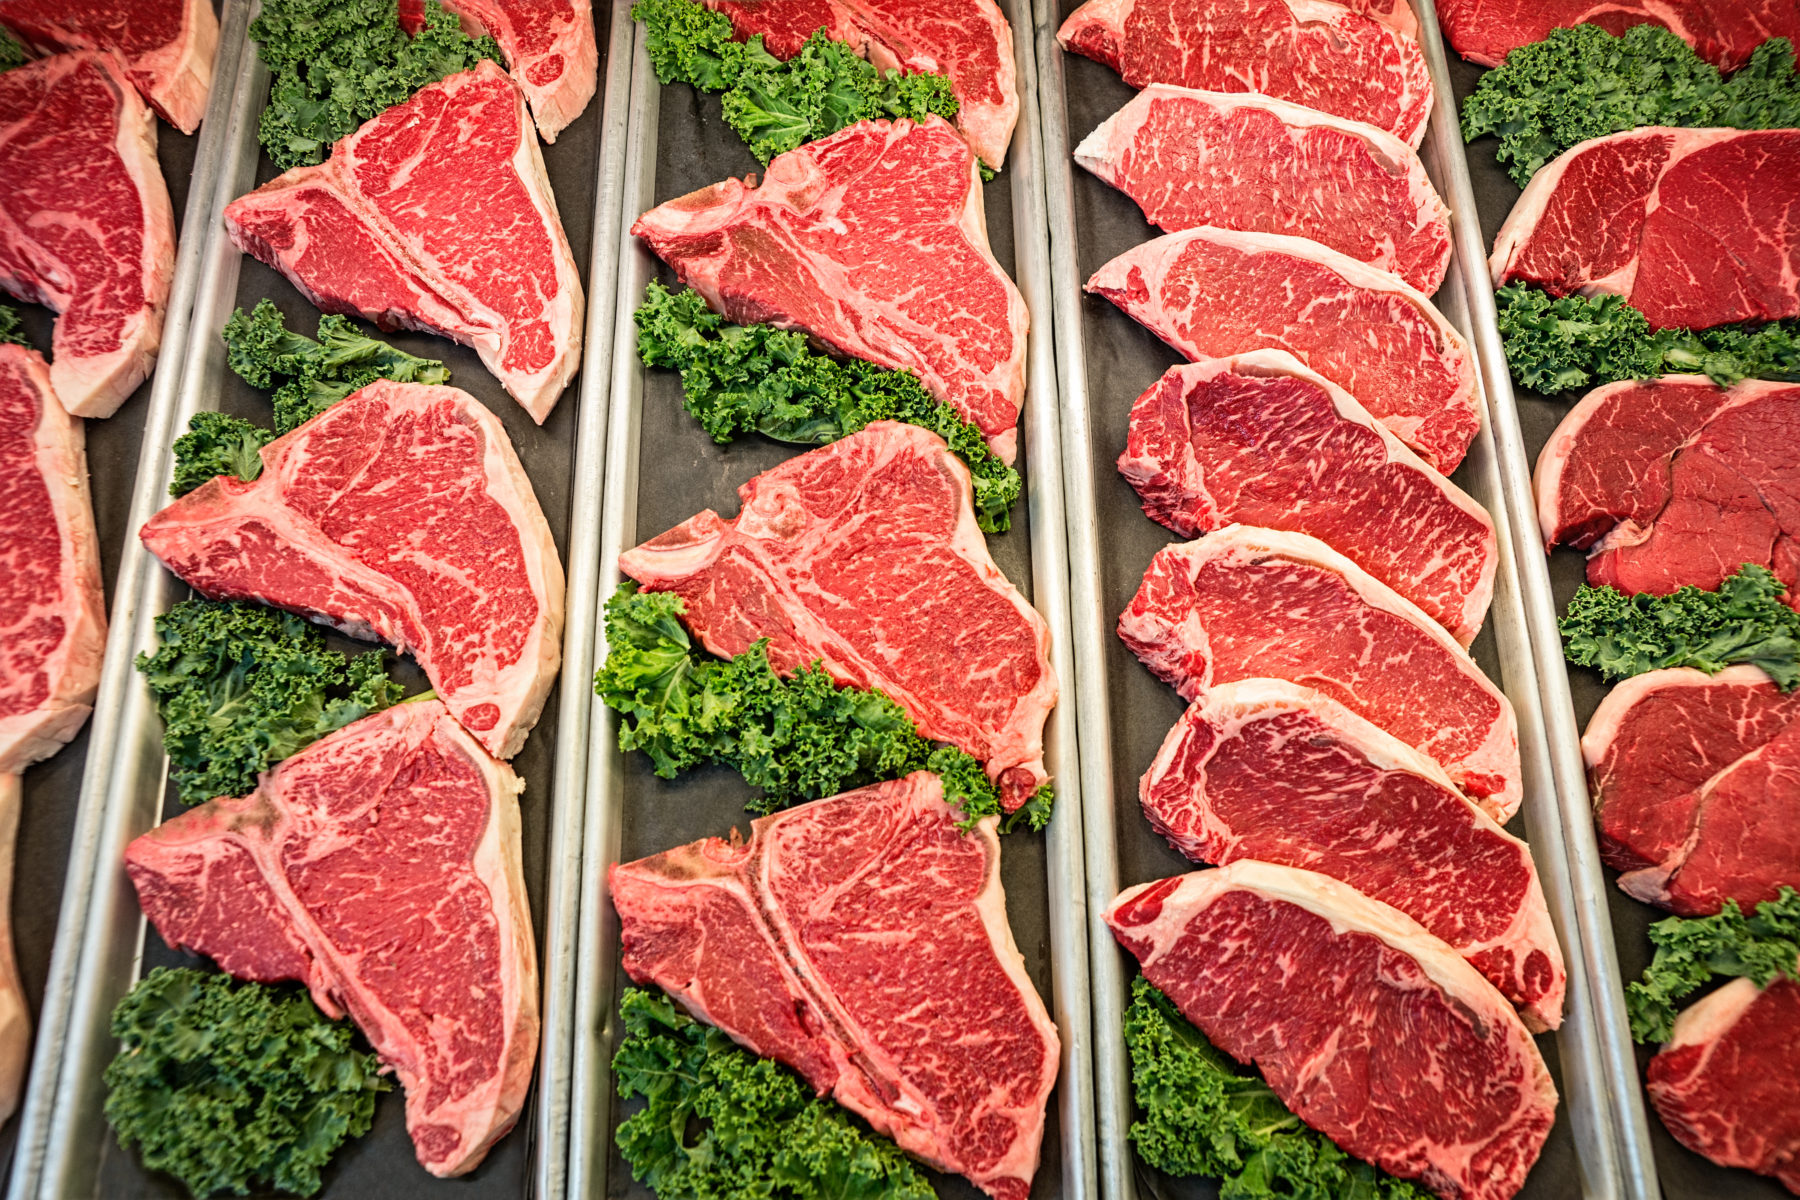 NCBA's Mike Simone Says Consumer Interest in Fake Meat is on the Decline